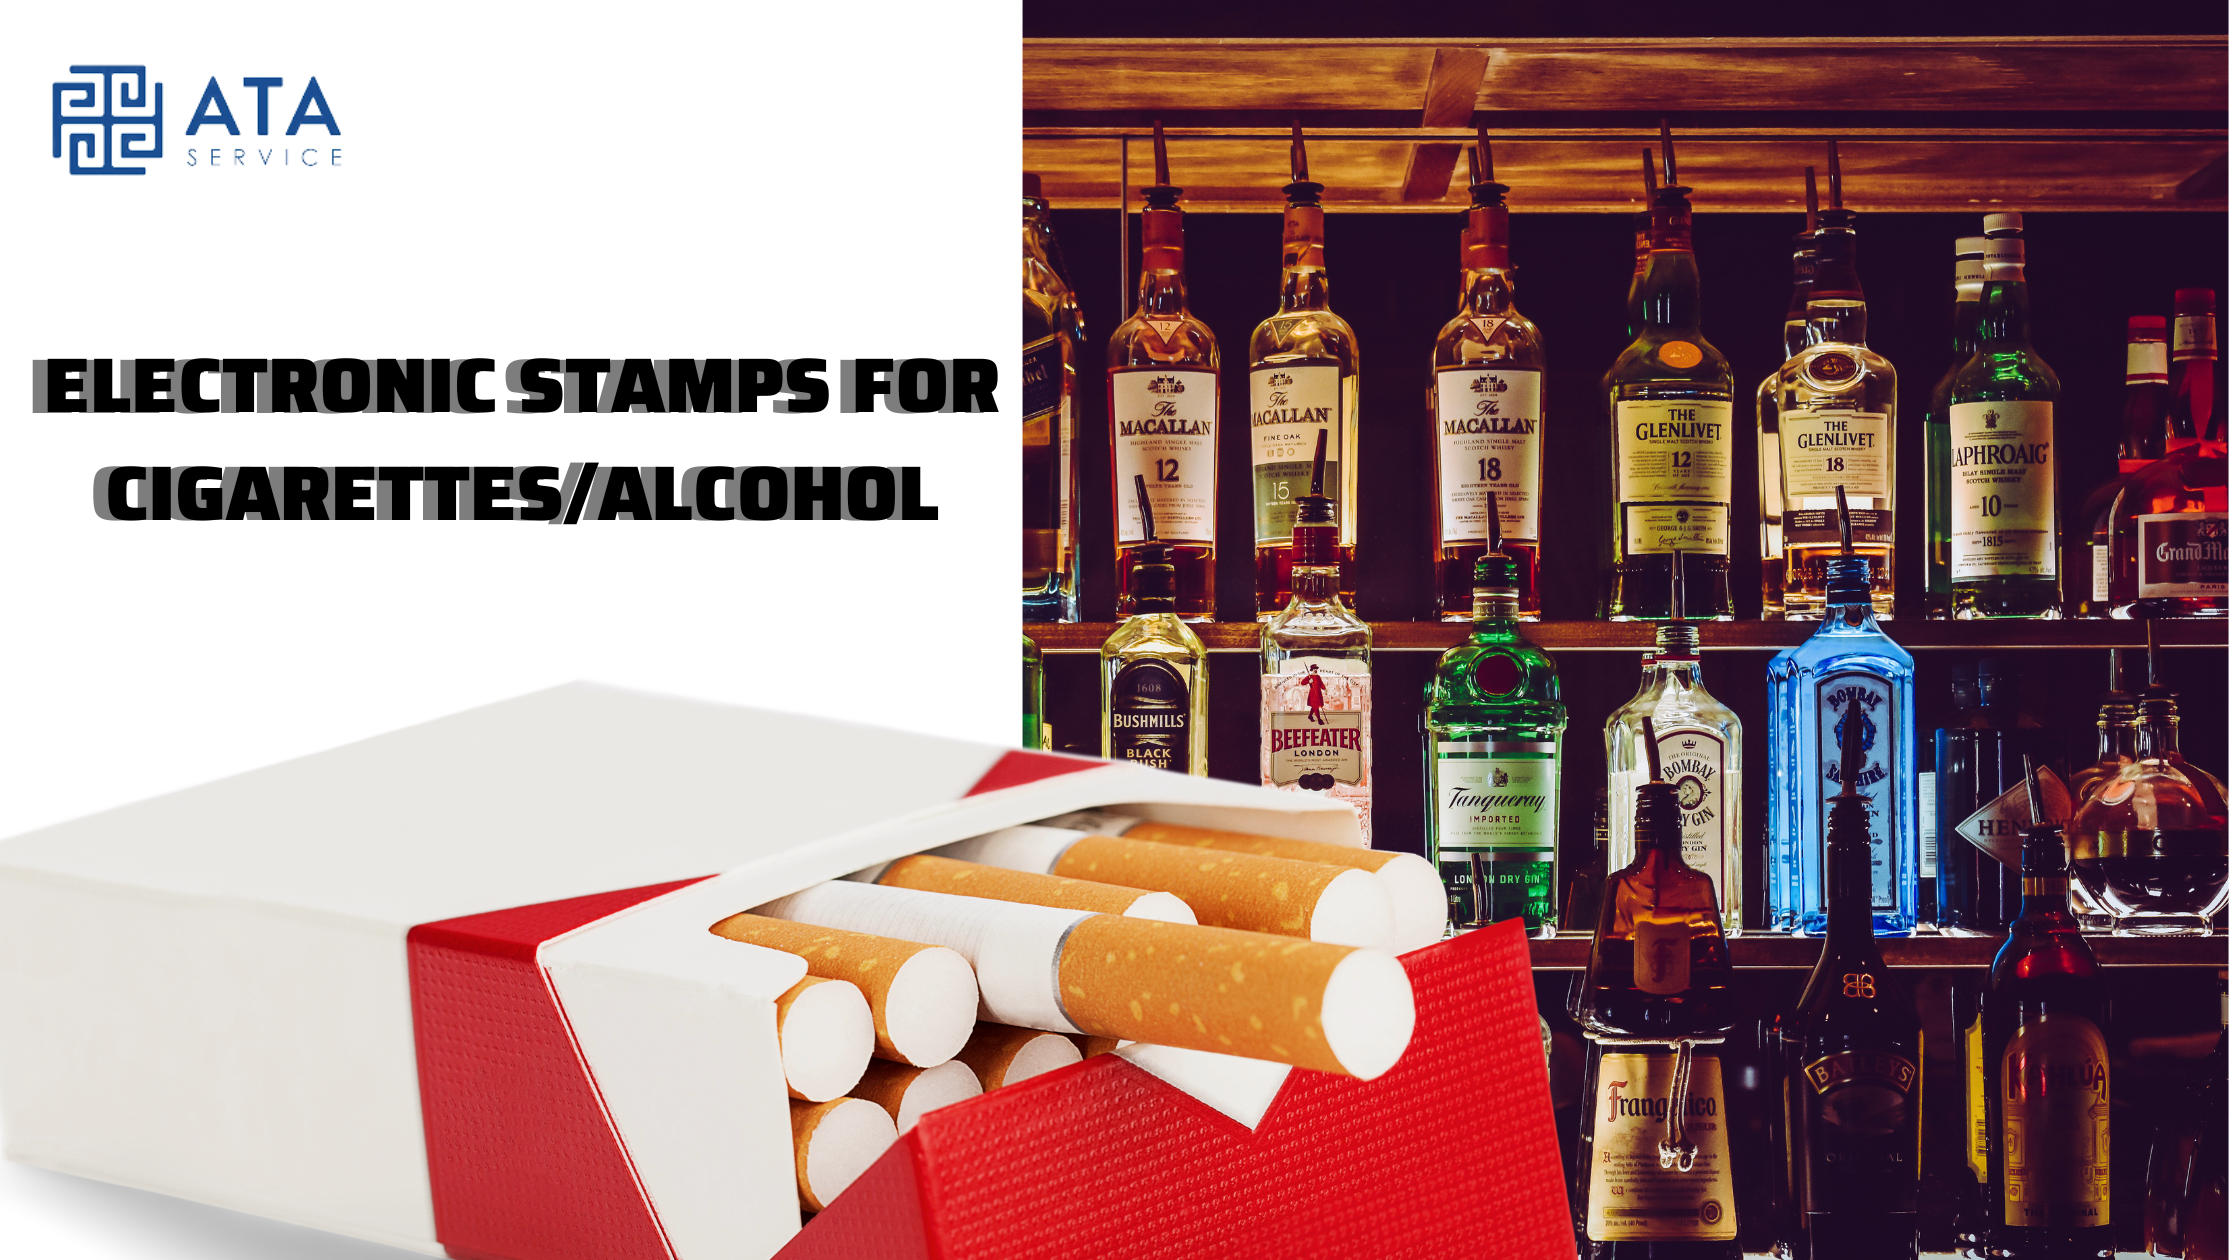 ELECTRONIC STAMPS FOR CIGARETTES/ALCOHOL